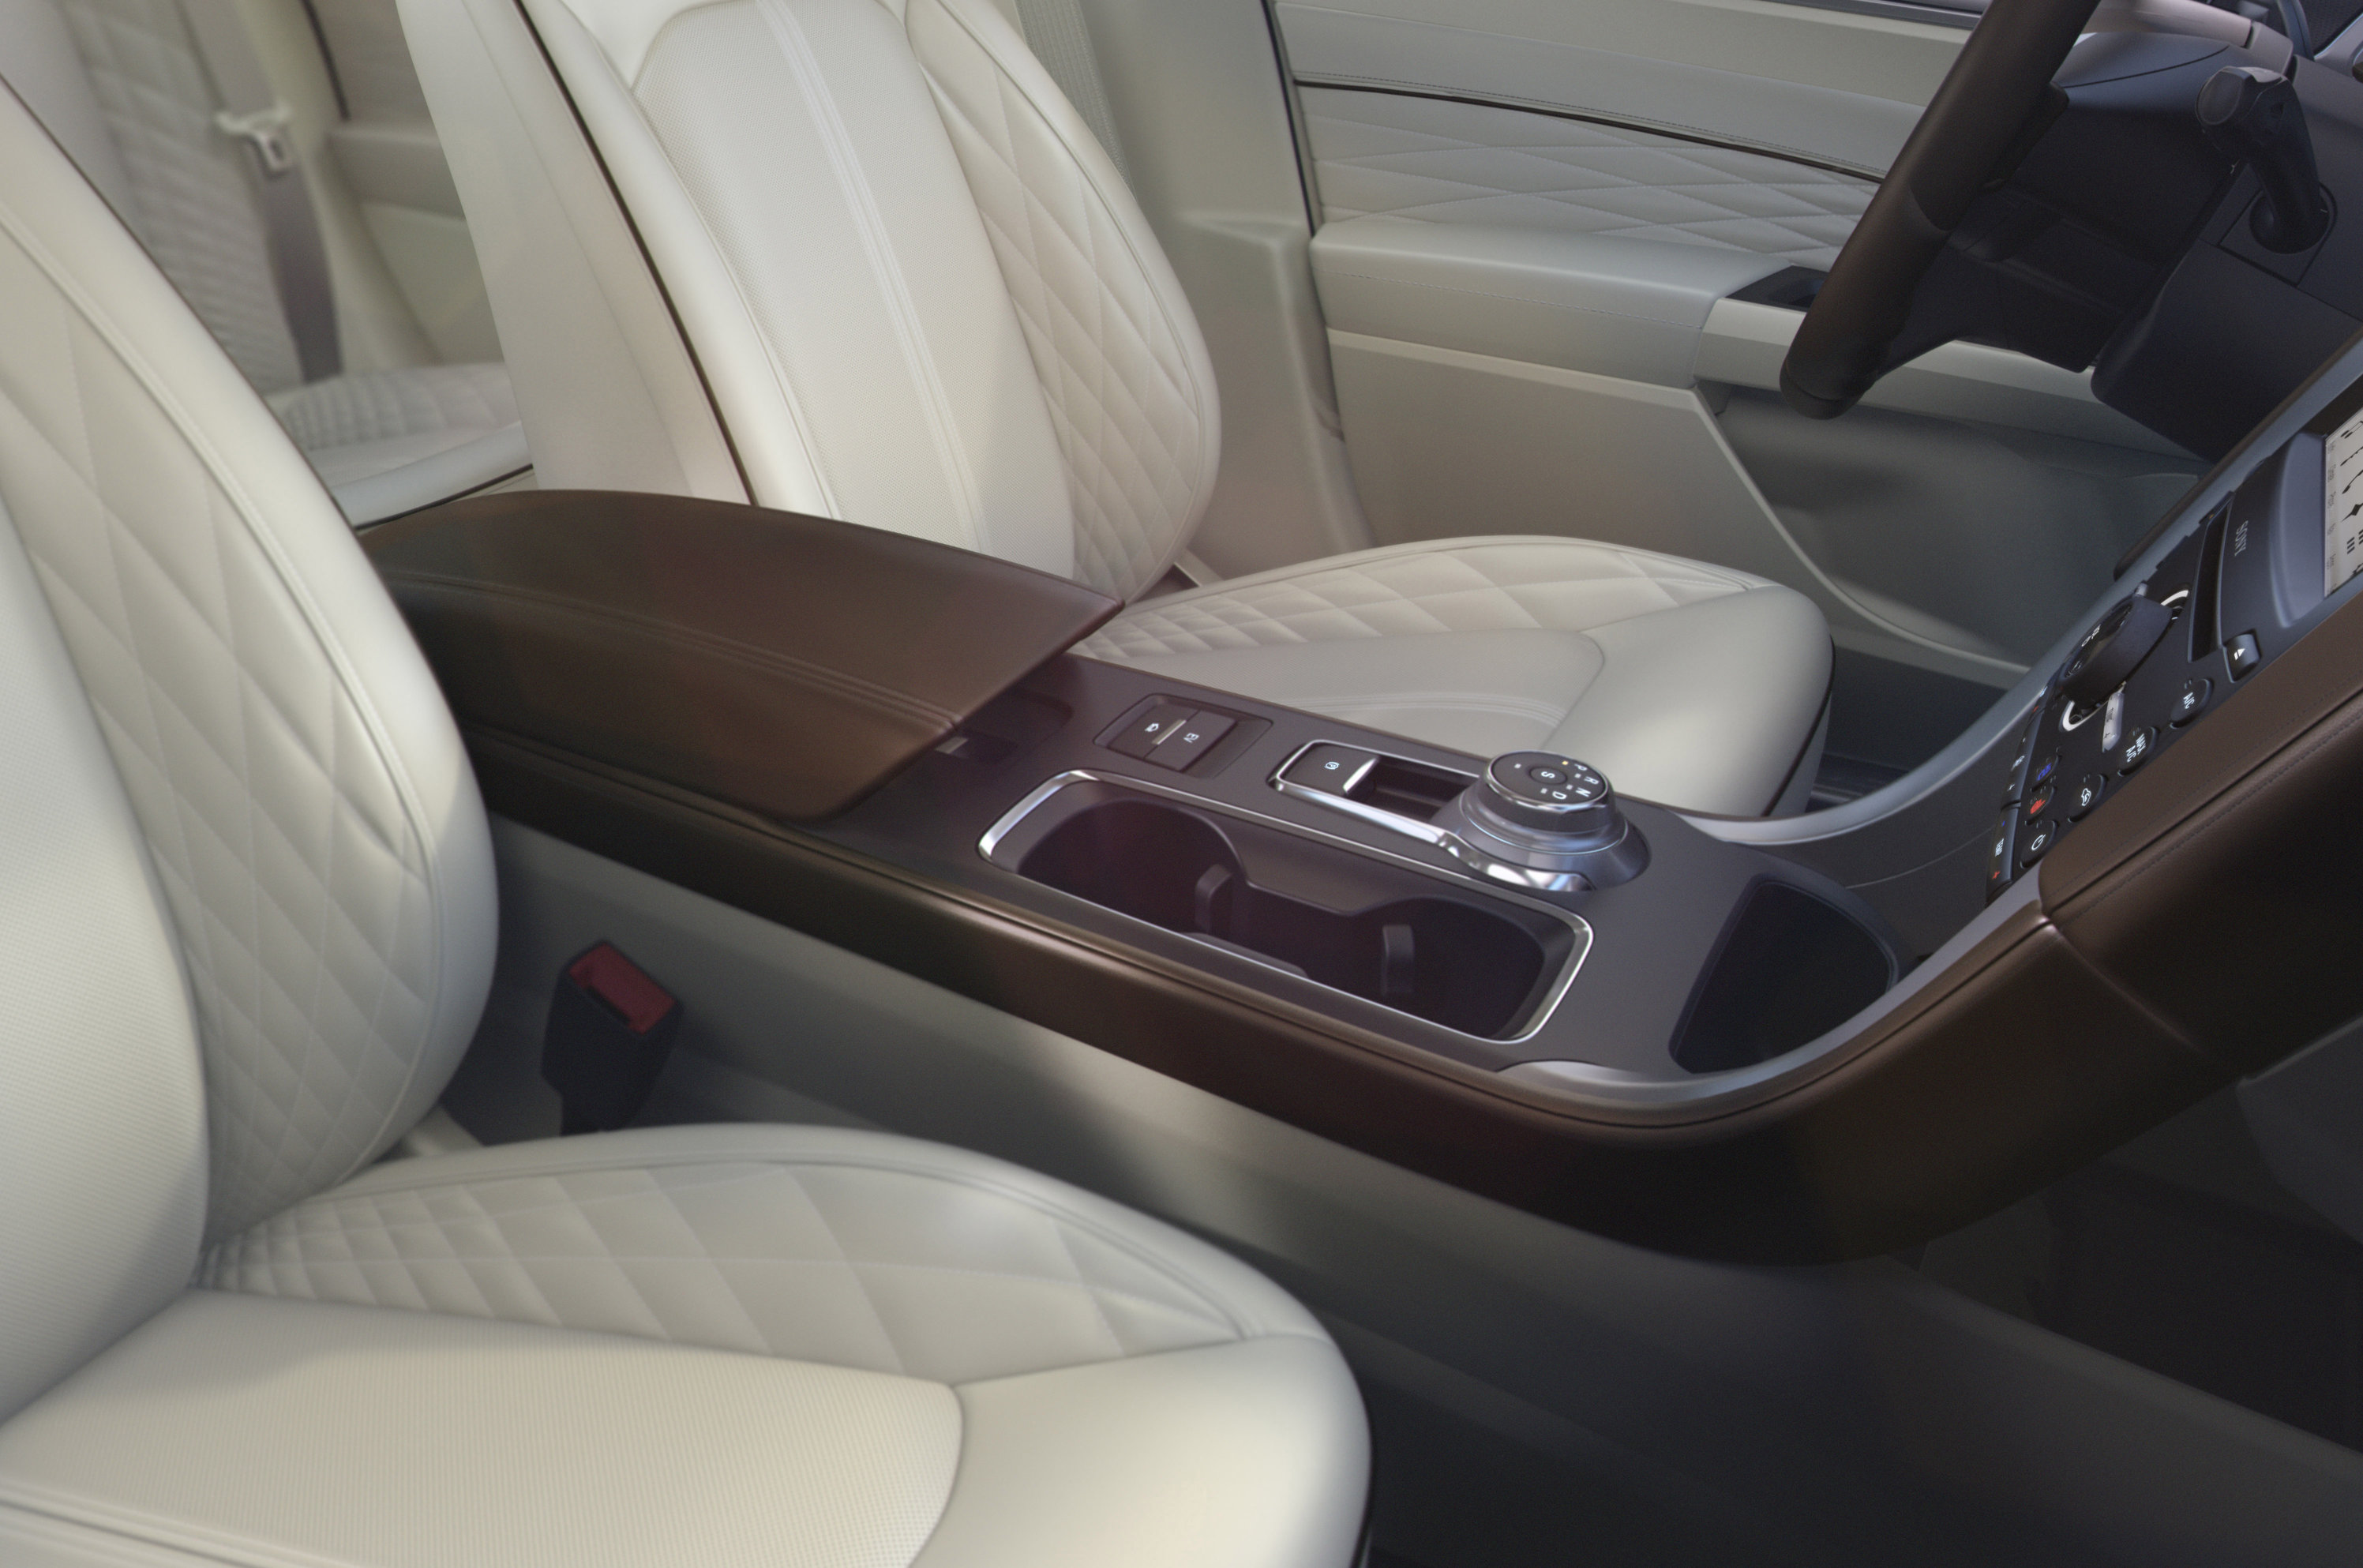 The center console of the new 2017 Ford Fusion includes a rotary gear shift dial and two relocated cup-holders.